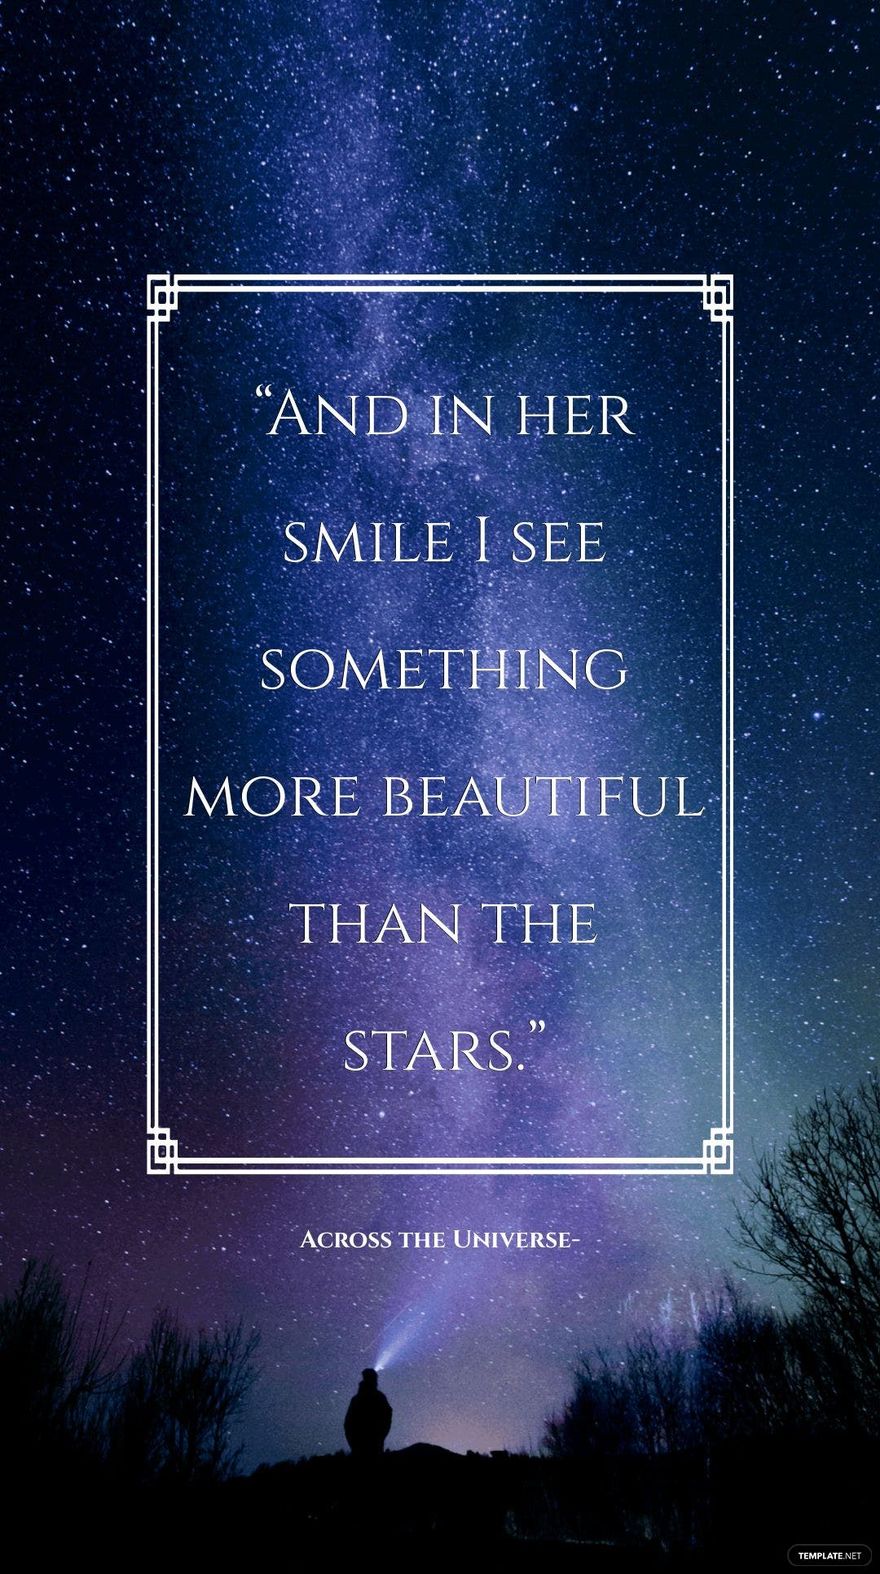 Across the Universe — “And in her smile I see something more beautiful than the stars.”